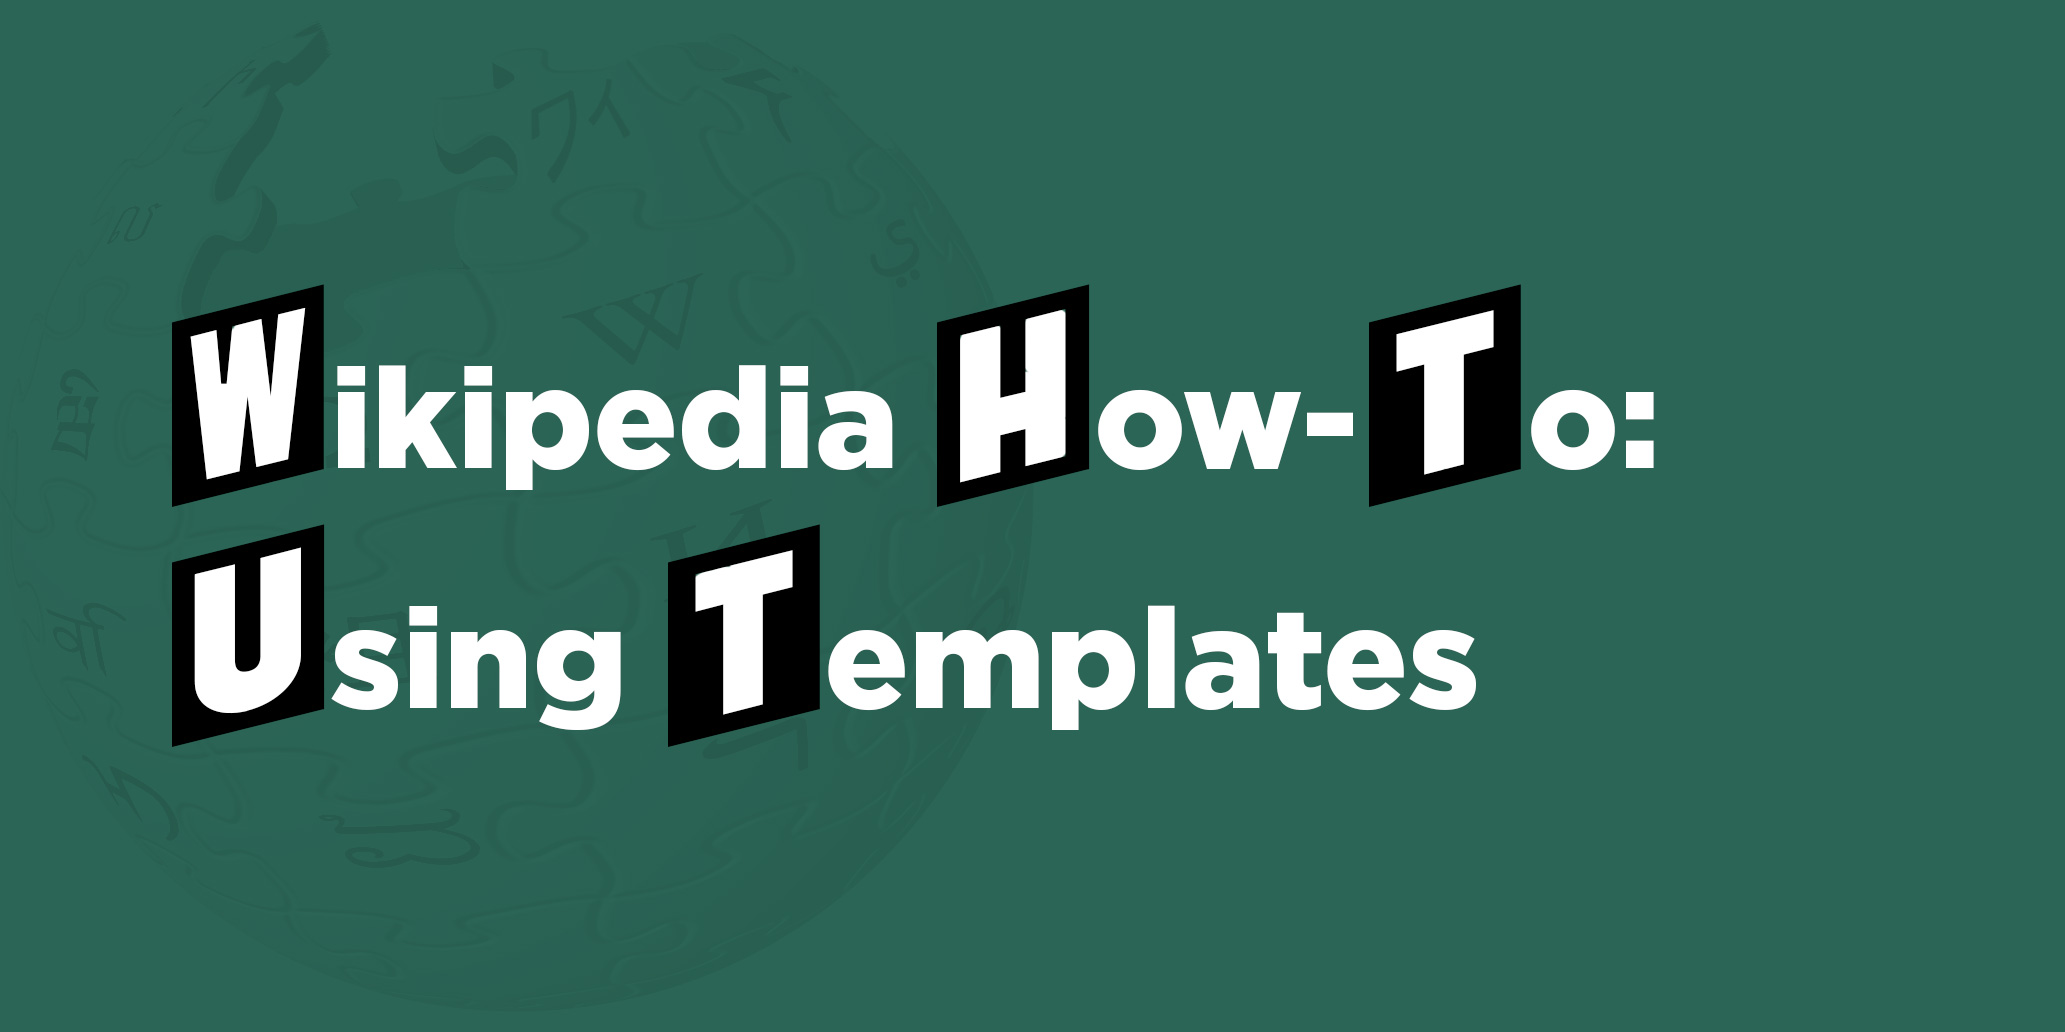 Wikipedia How-To: Using Templates